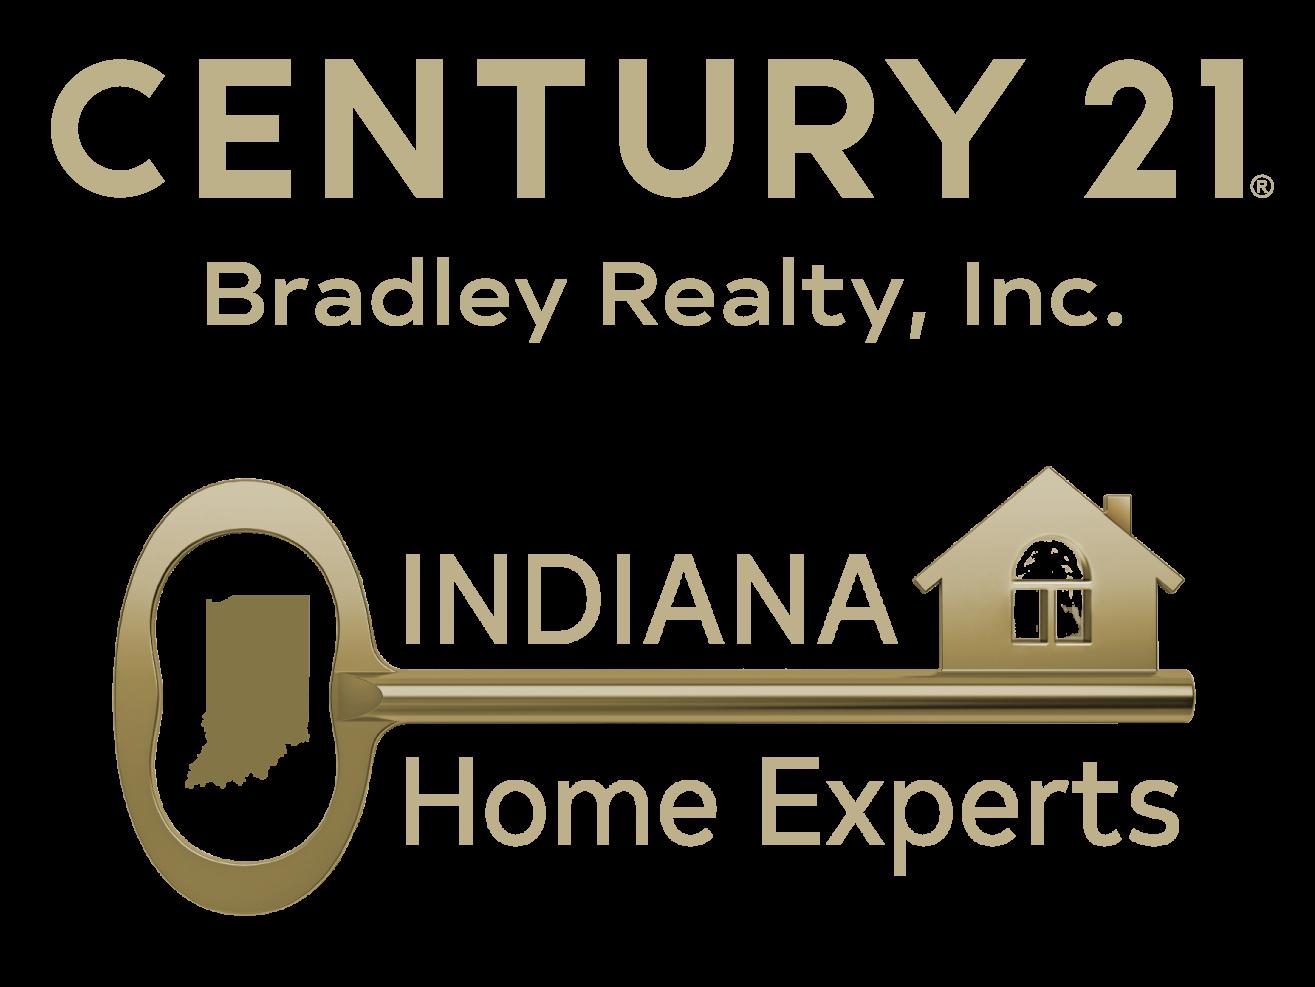 Indiana Home experts